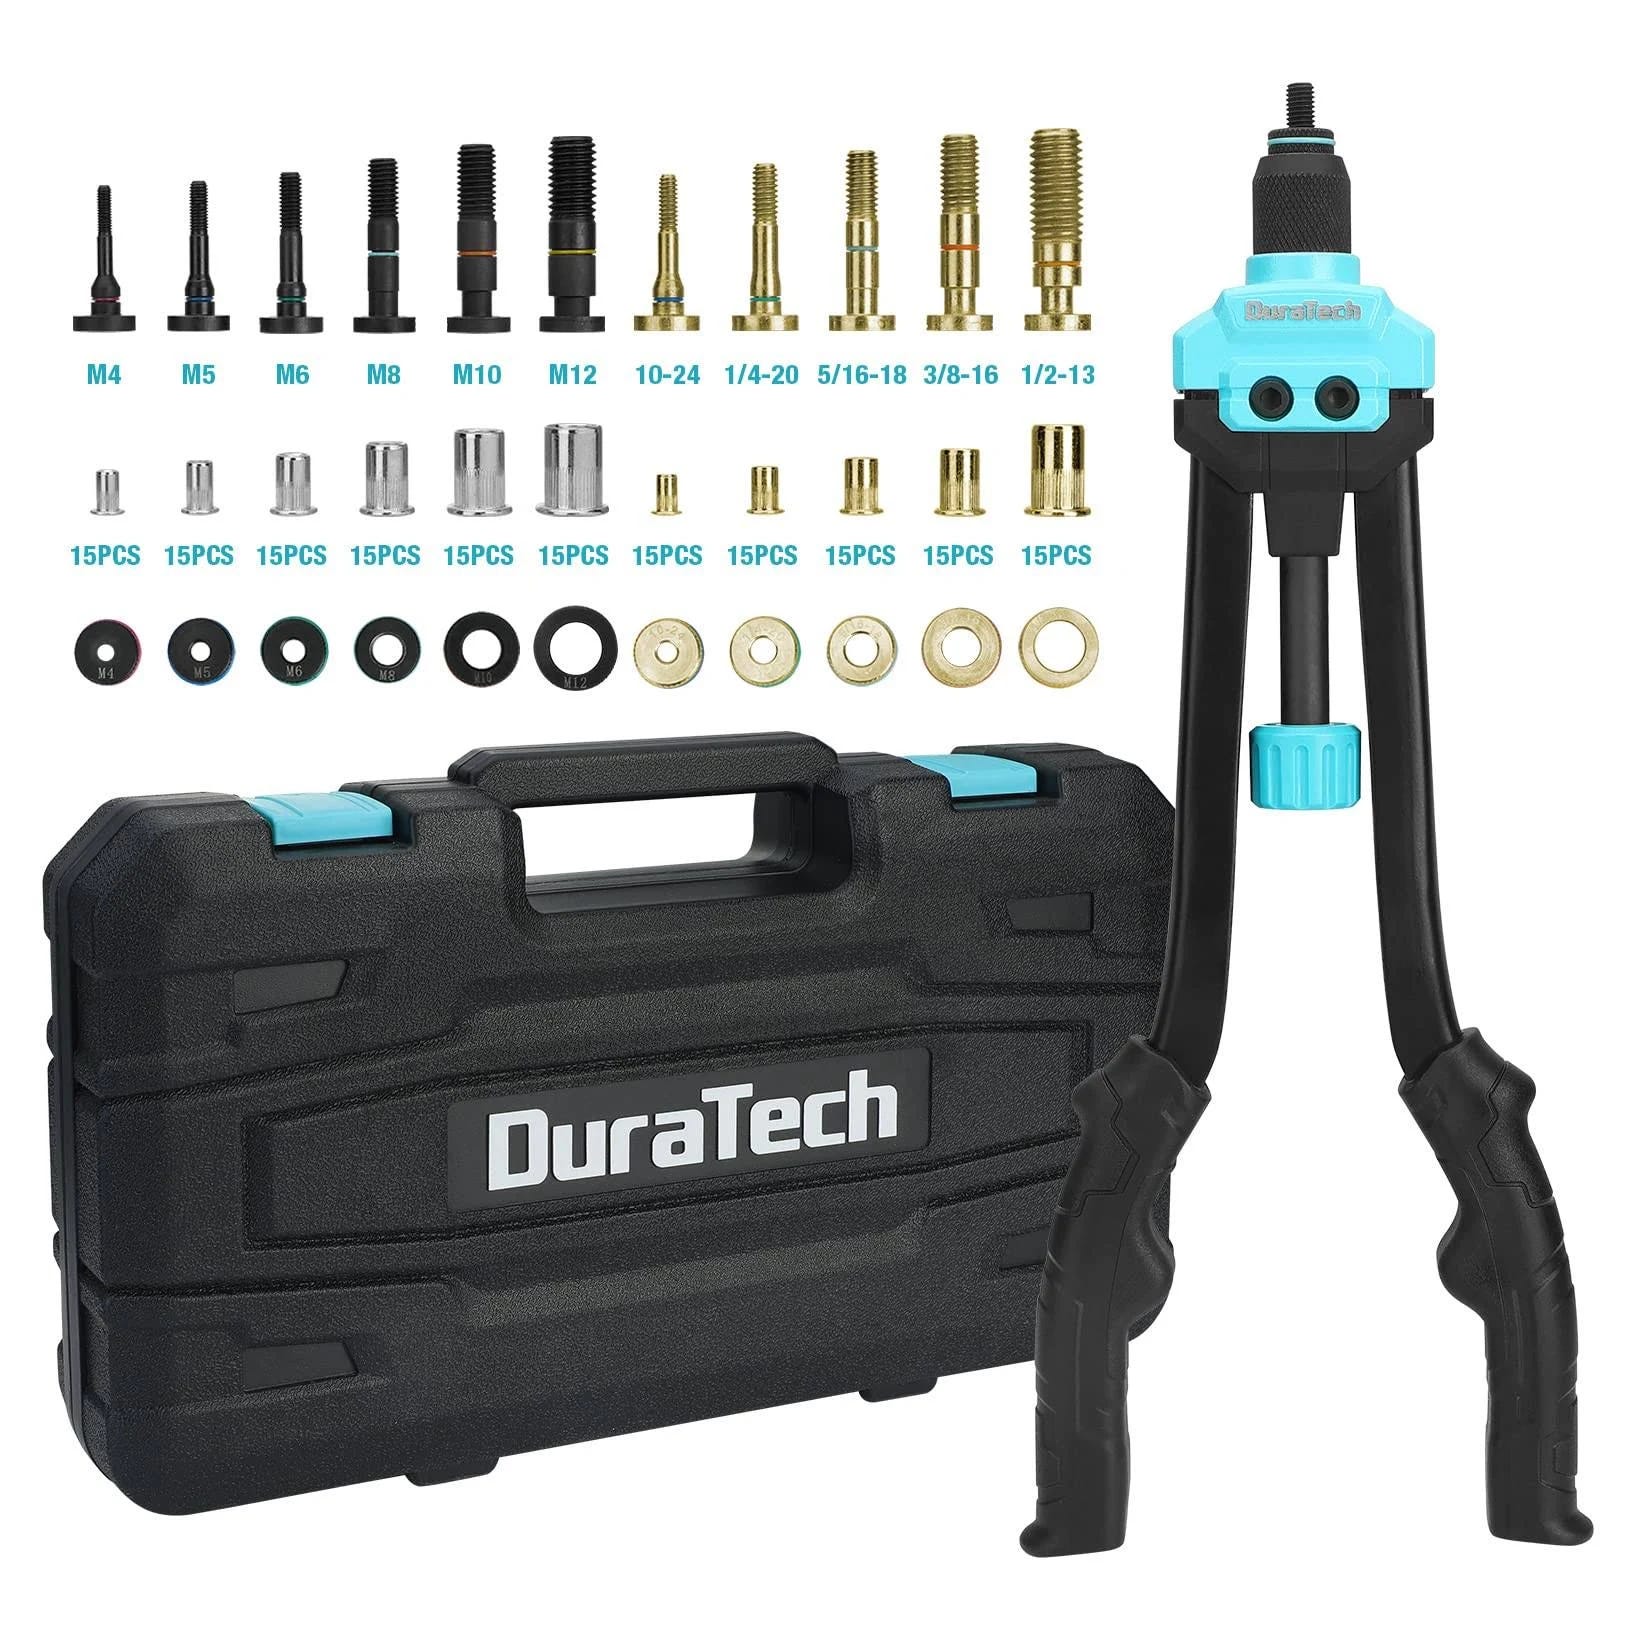 DuraTech Rivnut Tool Kit with 16